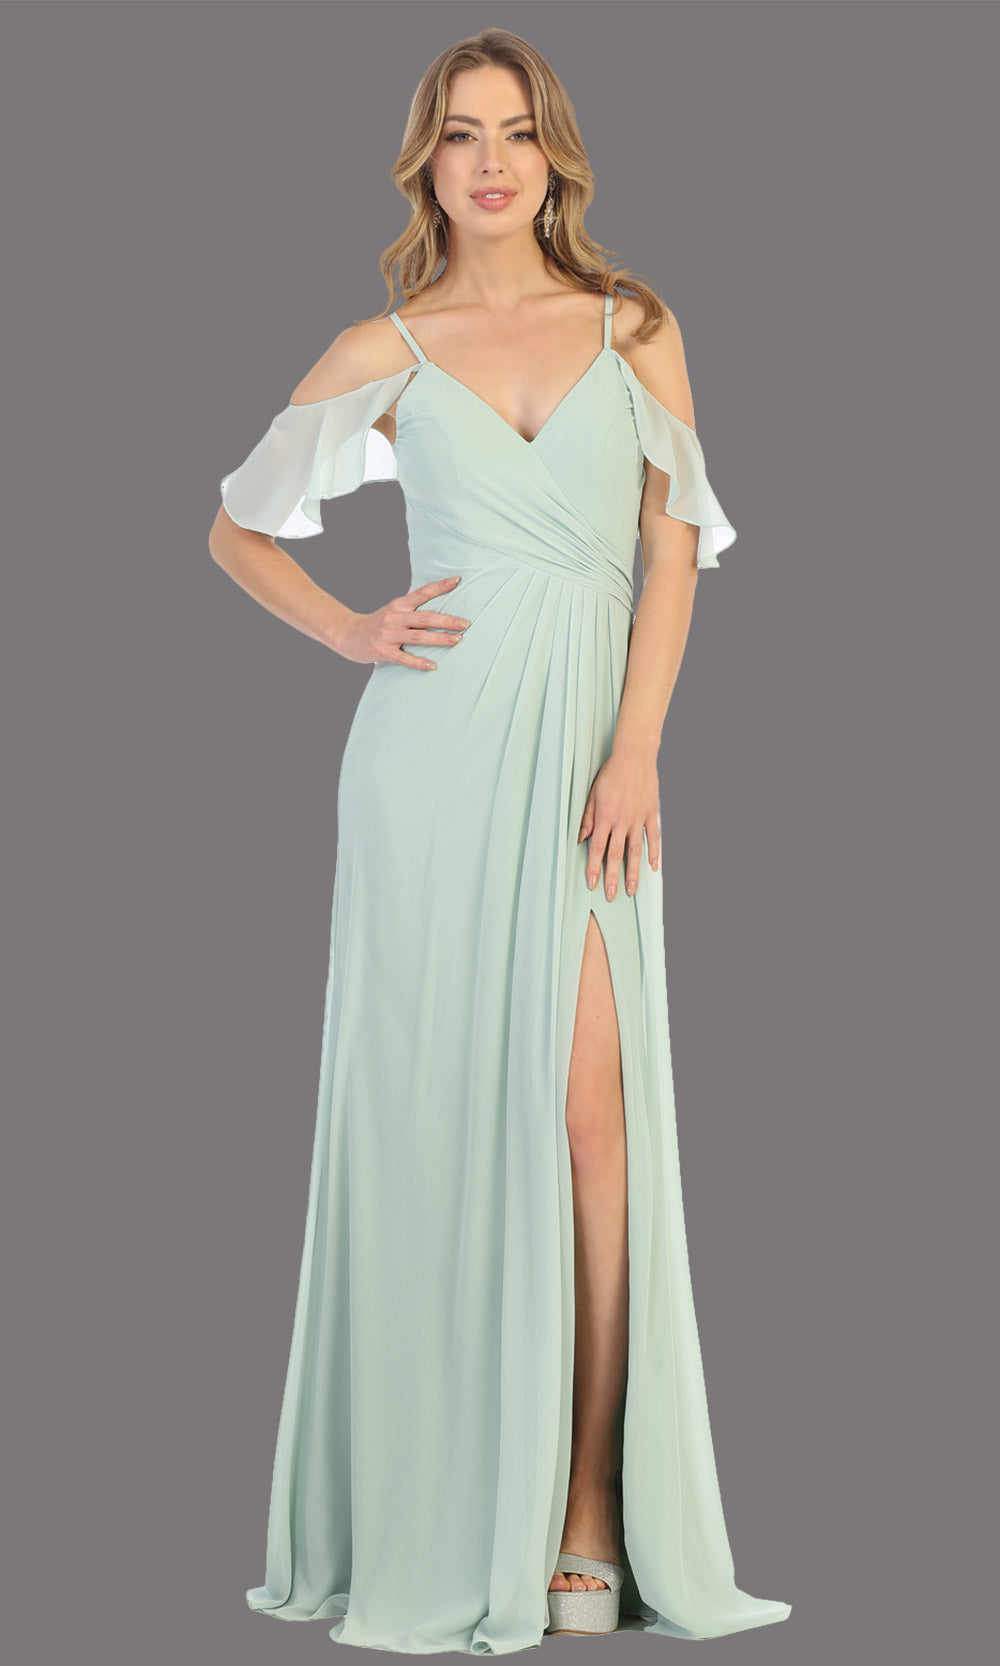 Mayqueen MQ1732 long sage green flowy, a-line chiffon dress w/cold shoulder & high slit. This light green simple dress is perfect as a bridesmaid dress, formal wedding guest dress, destination wedding guest dress, prom dress. Plus sizes avail